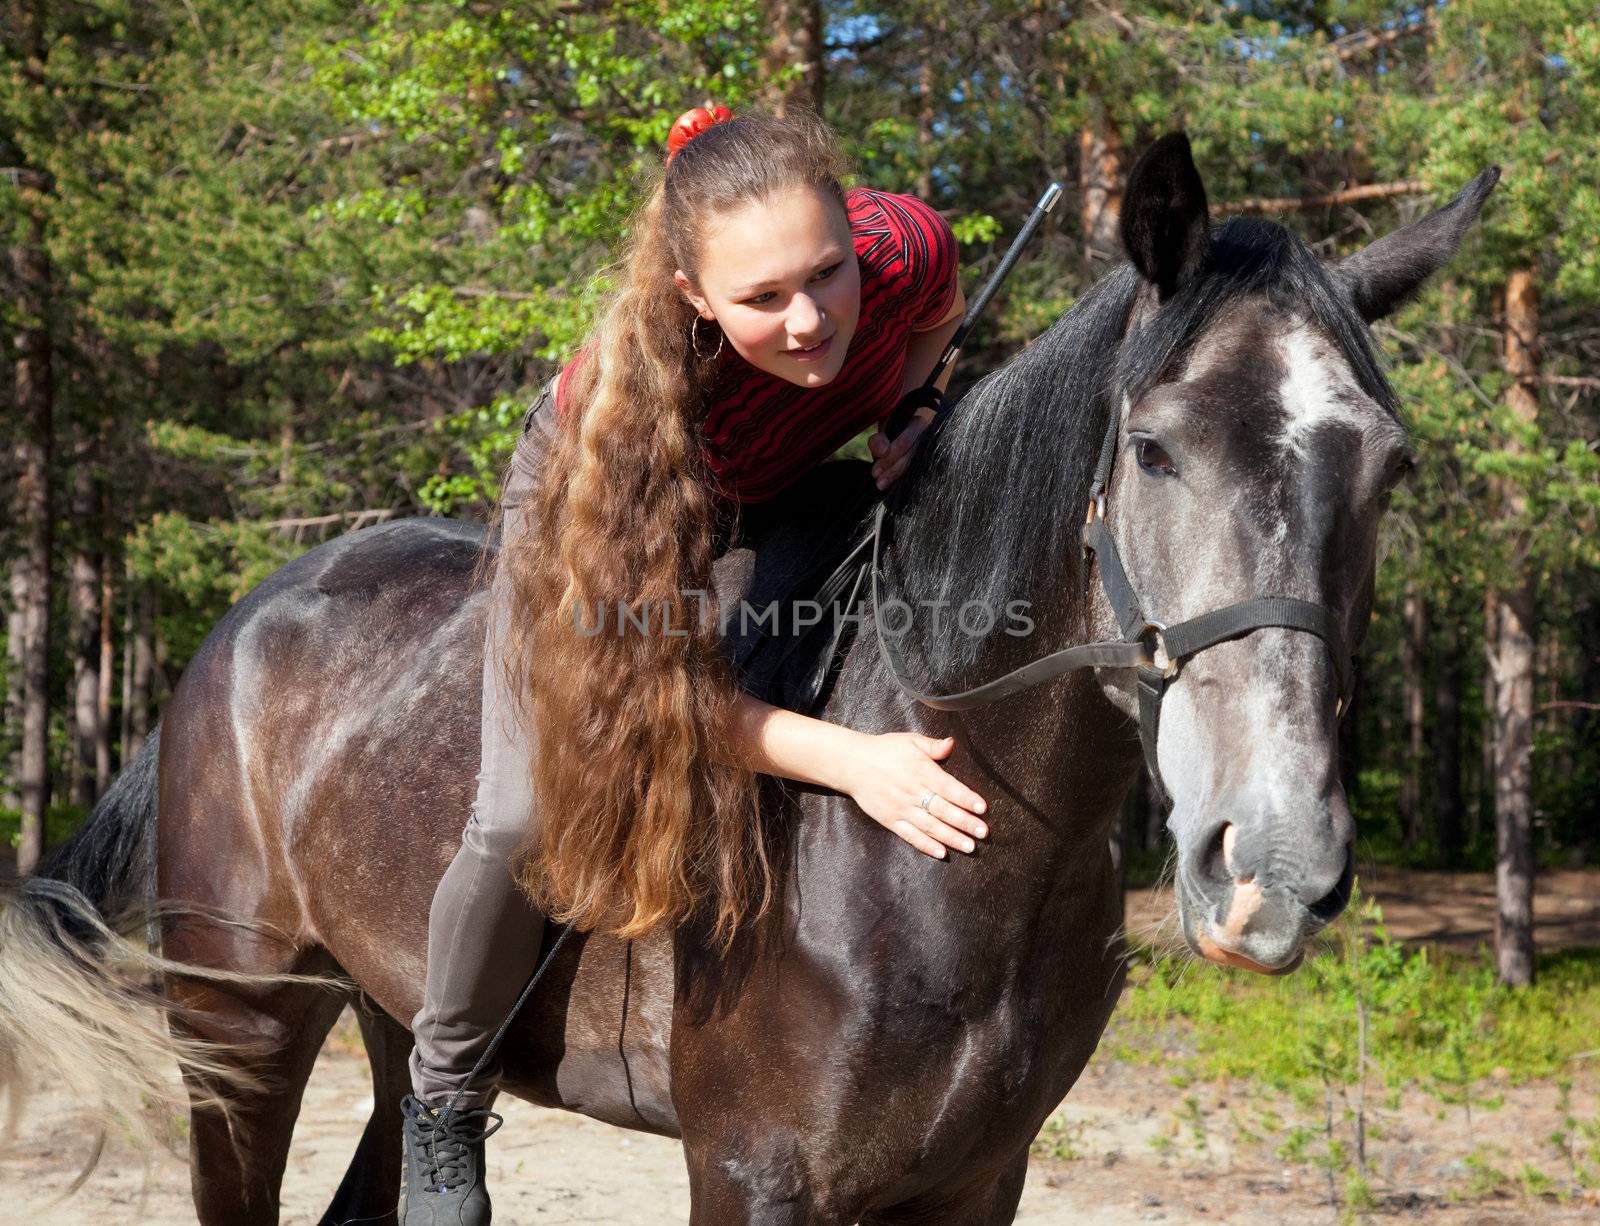 A girl with her hair stroked the horse against the backdrop of green forest